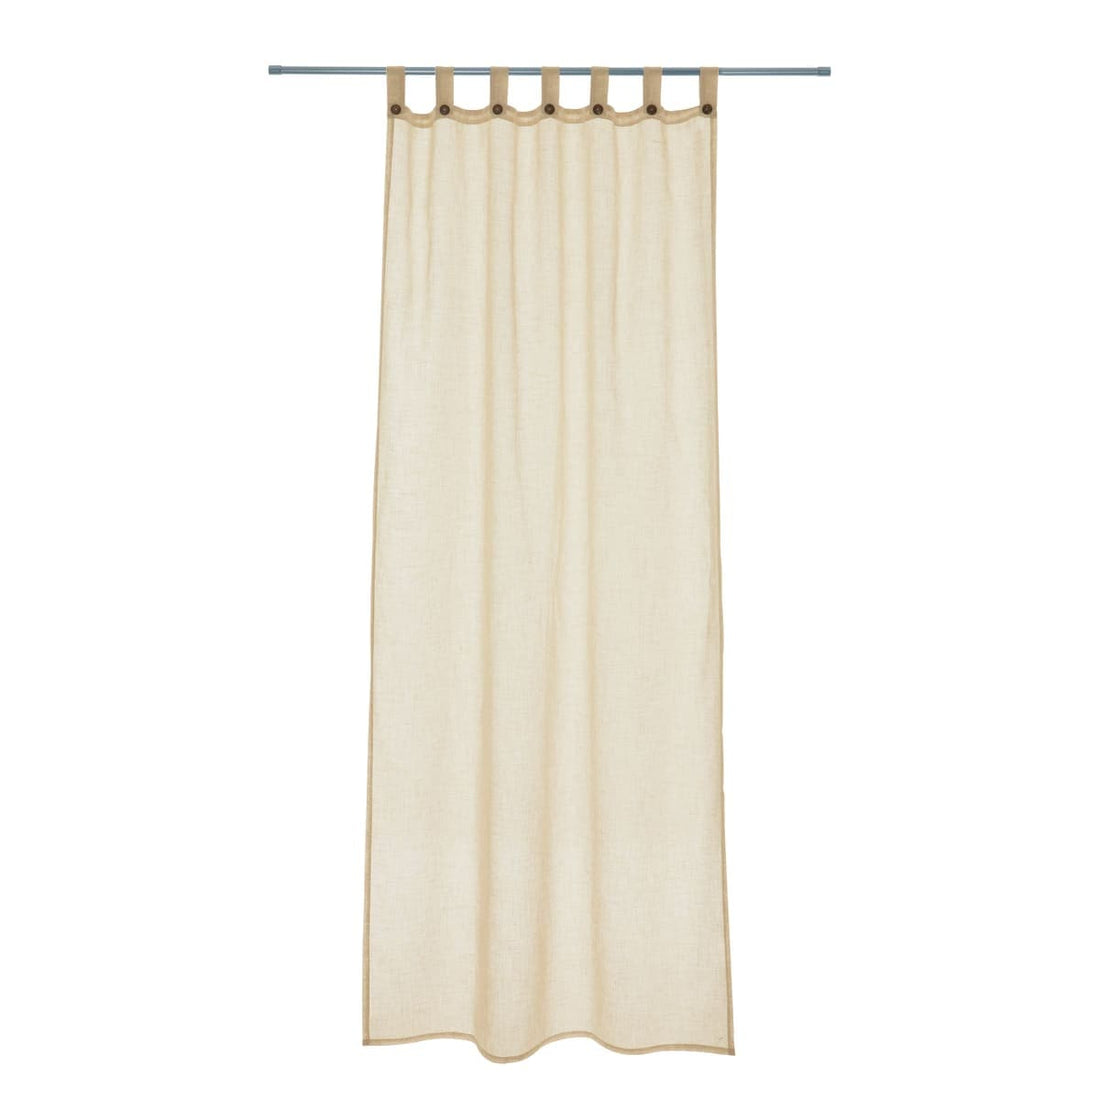 CHARLINA ECRU OPAQUE CURTAIN 140X280 WITH LOOPS AND BUTTONS - best price from Maltashopper.com BR480004837